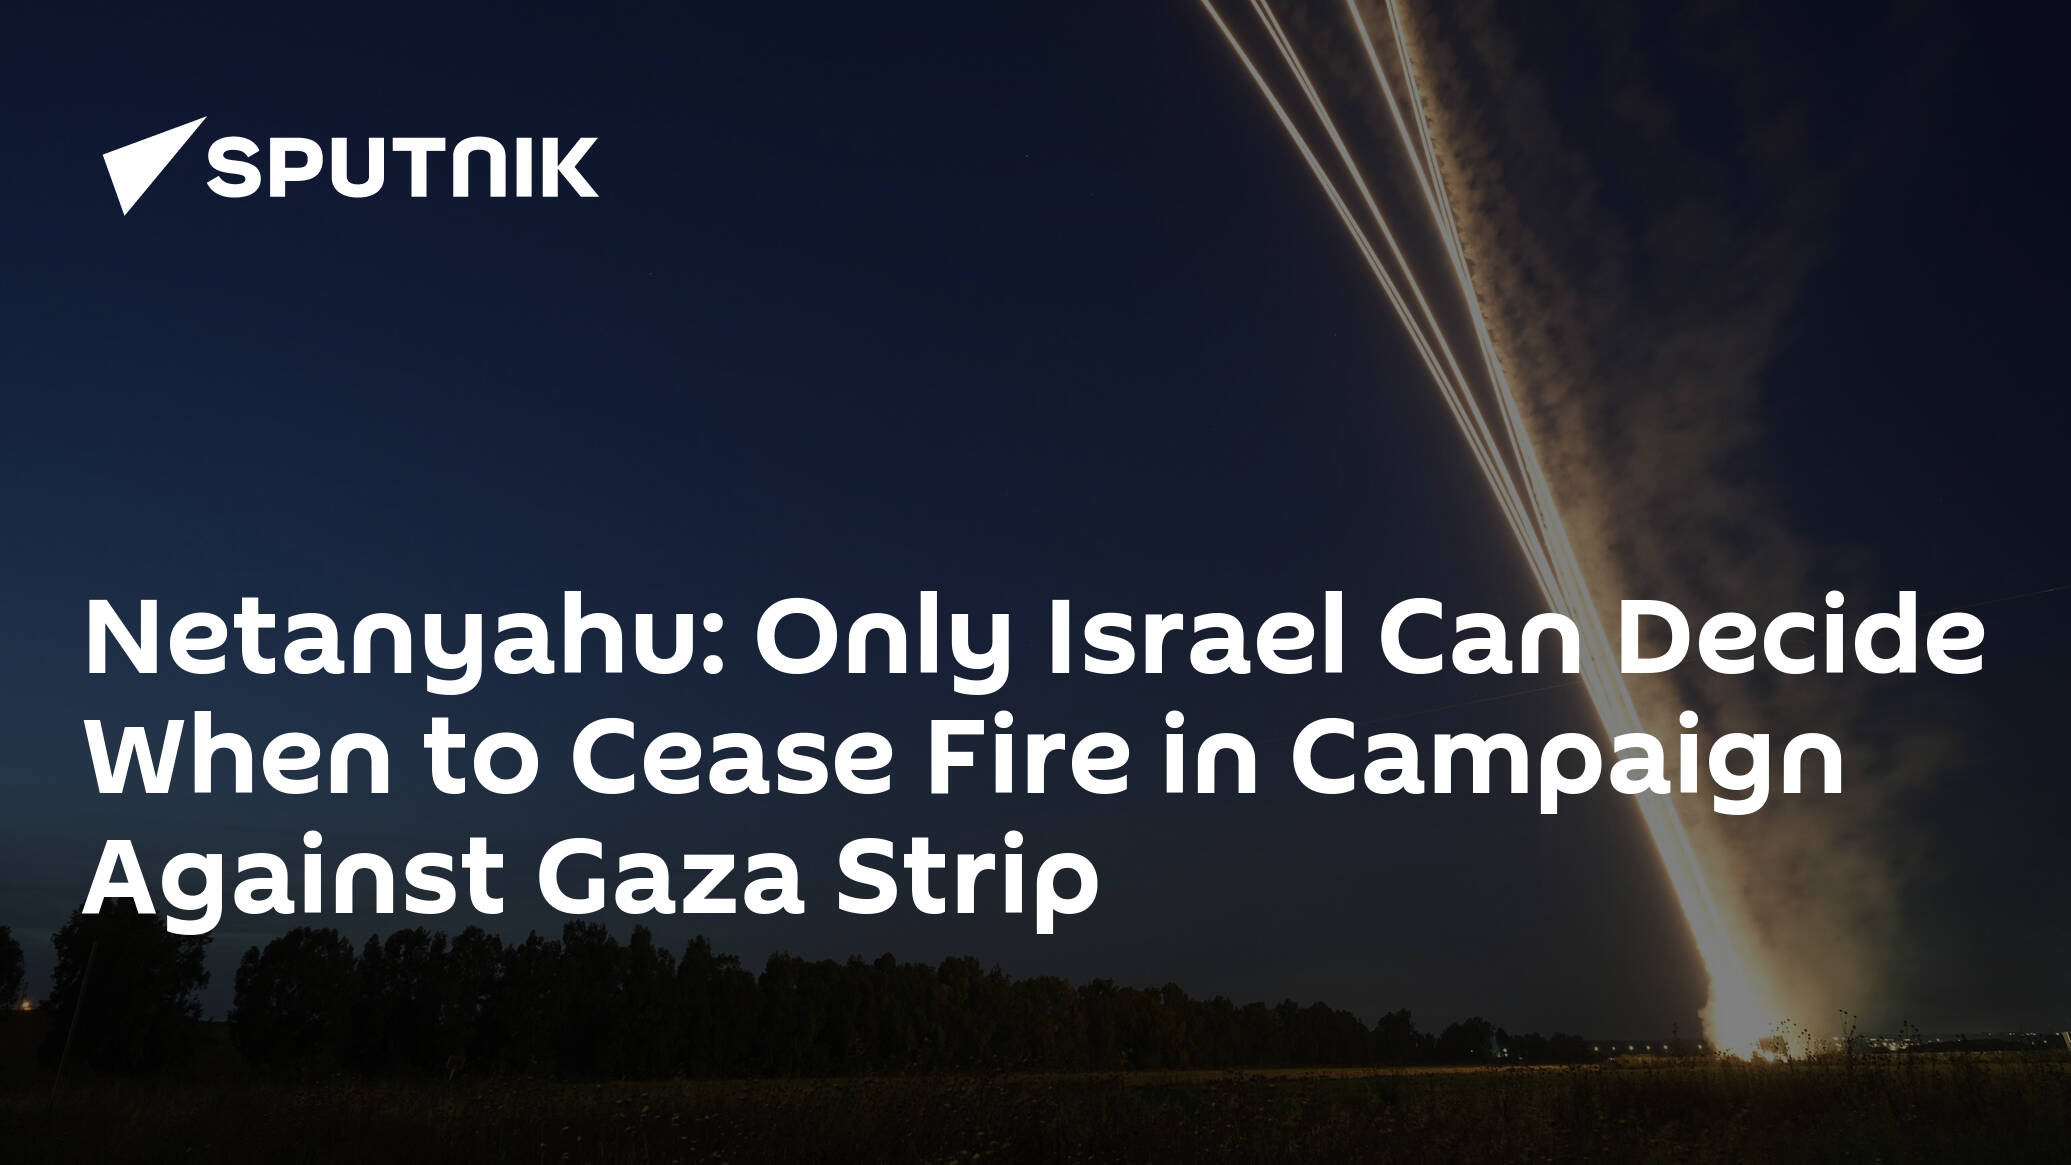 Netanyahu: Only Israel Can Decide When to Cease Fire in Campaign Against Gaza Strip